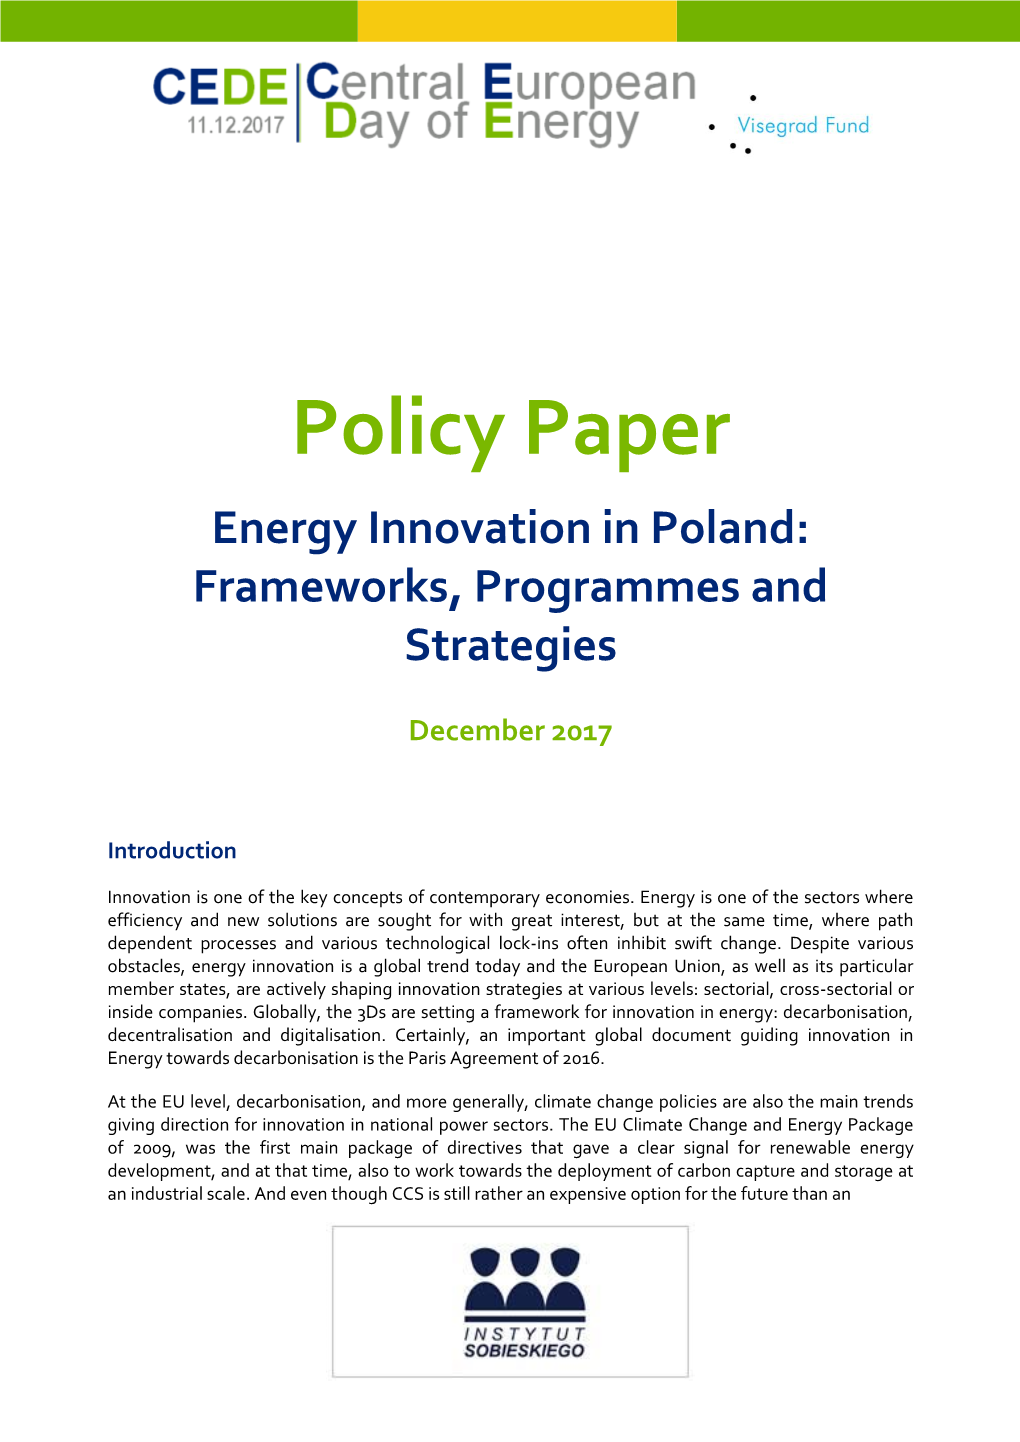 Energy Innovation in Poland: Frameworks, Programmes and Strategies